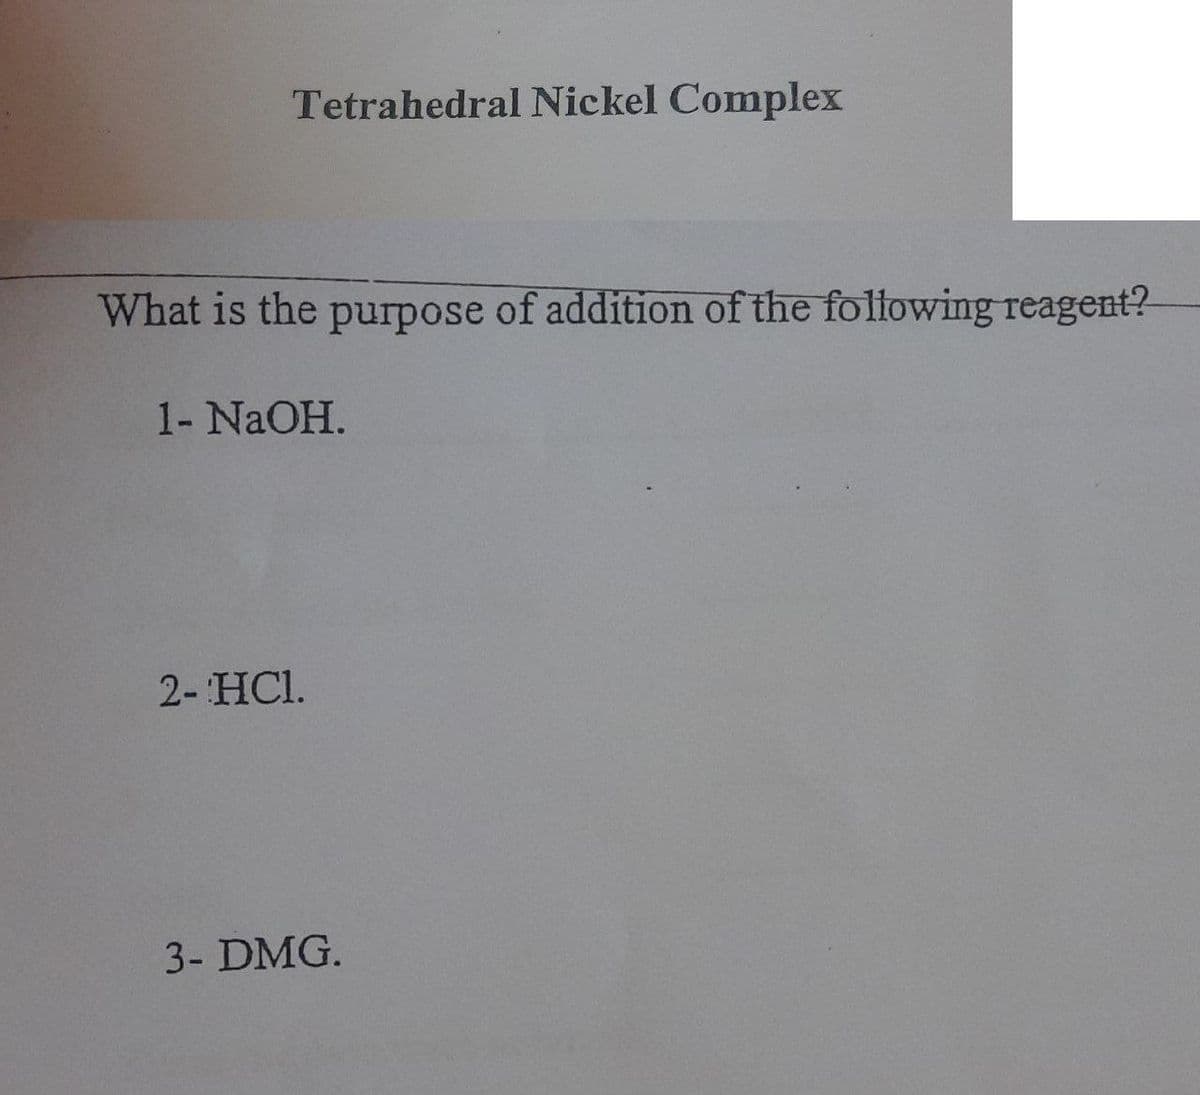 Tetrahedral Nickel Complex
What is the purpose of addition of the following reagent?
1- NaOH.
2- HCl.
3- DMG.
